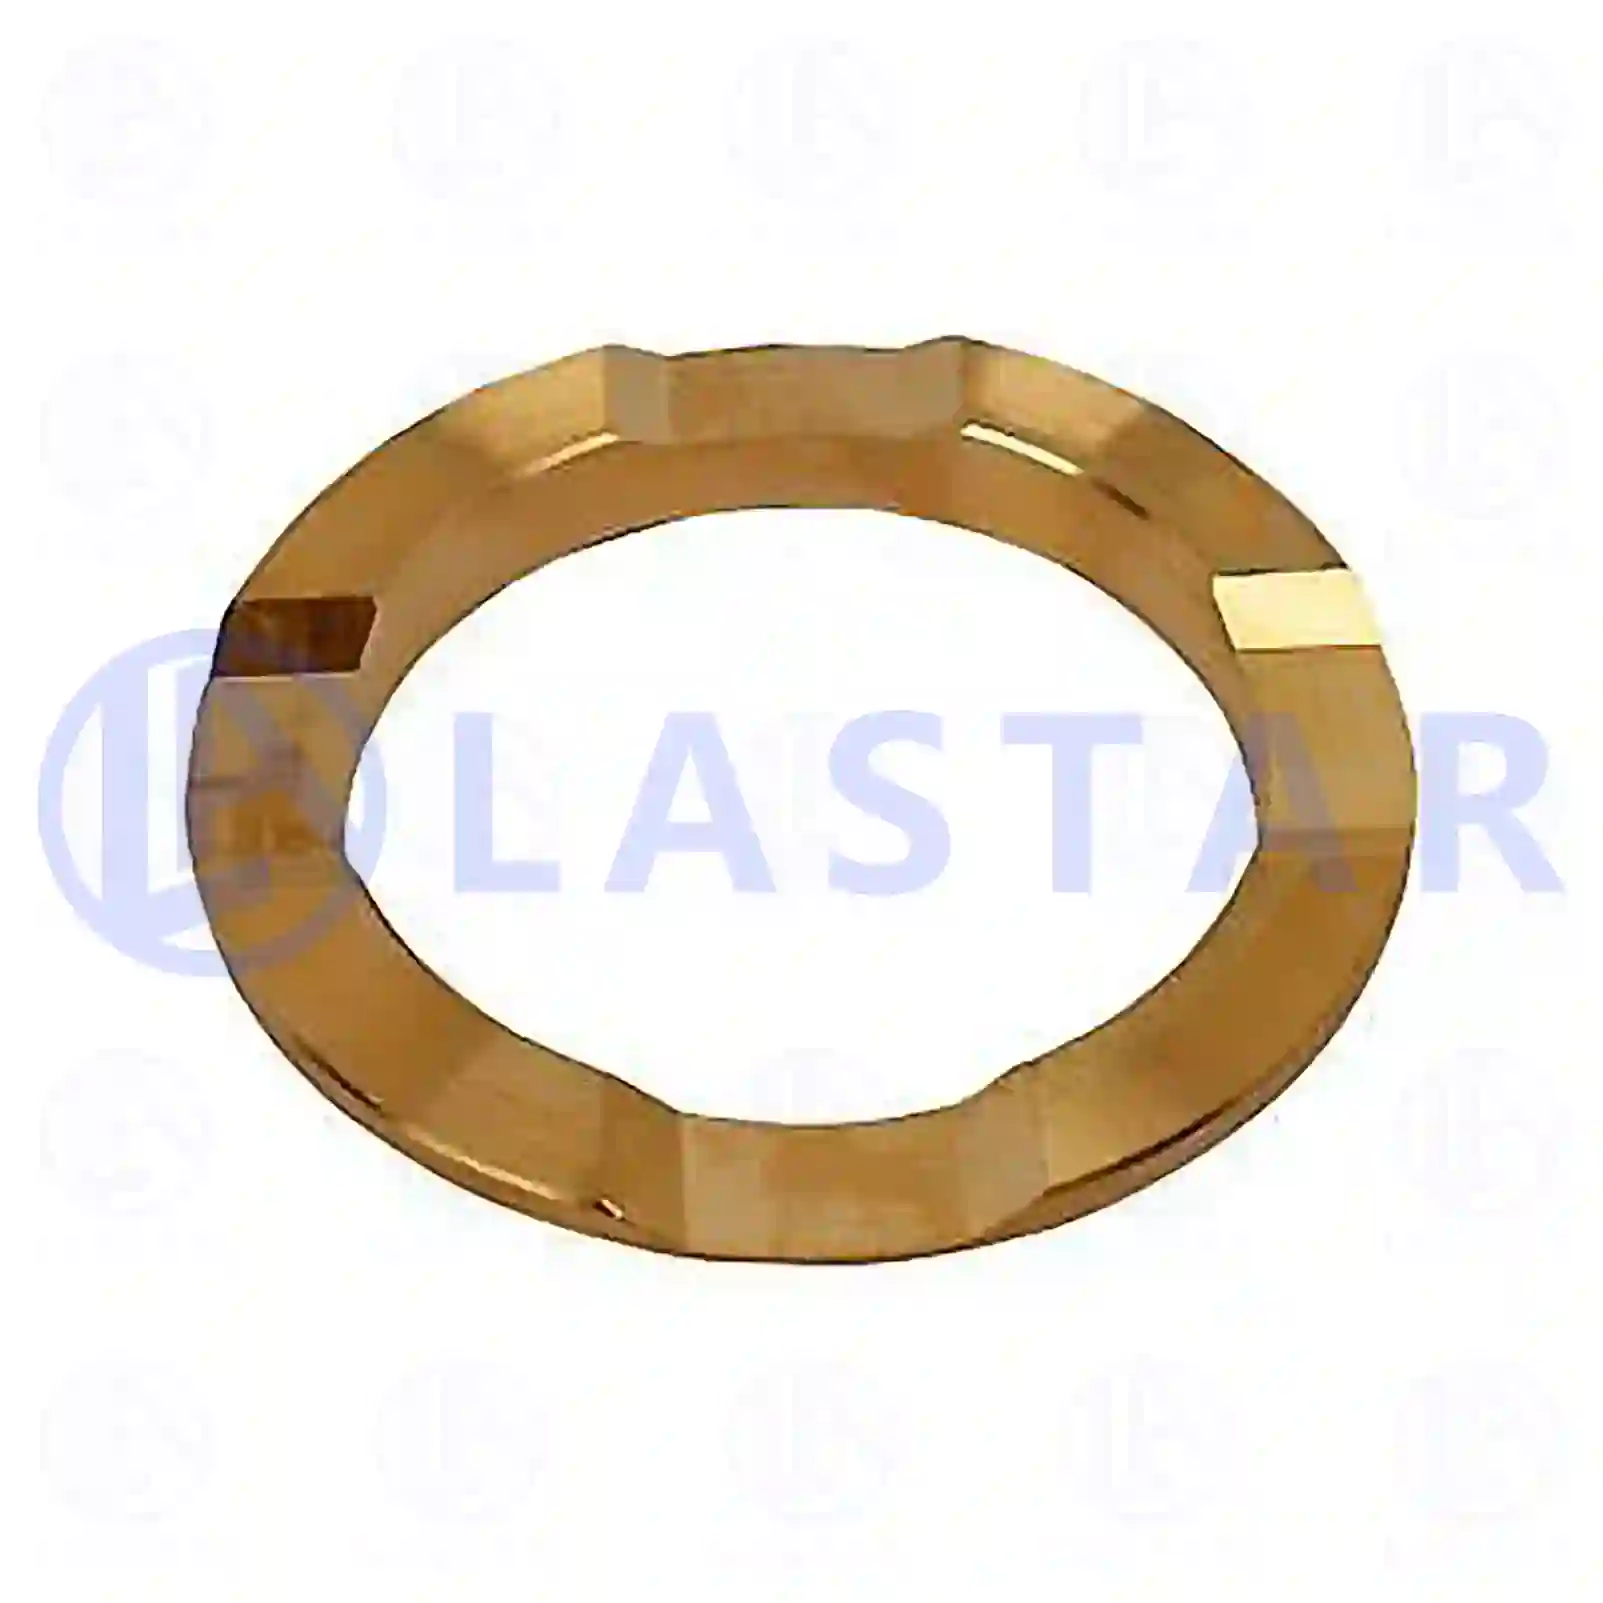 Spacer washer, 77726702, 42037800, , , ||  77726702 Lastar Spare Part | Truck Spare Parts, Auotomotive Spare Parts Spacer washer, 77726702, 42037800, , , ||  77726702 Lastar Spare Part | Truck Spare Parts, Auotomotive Spare Parts